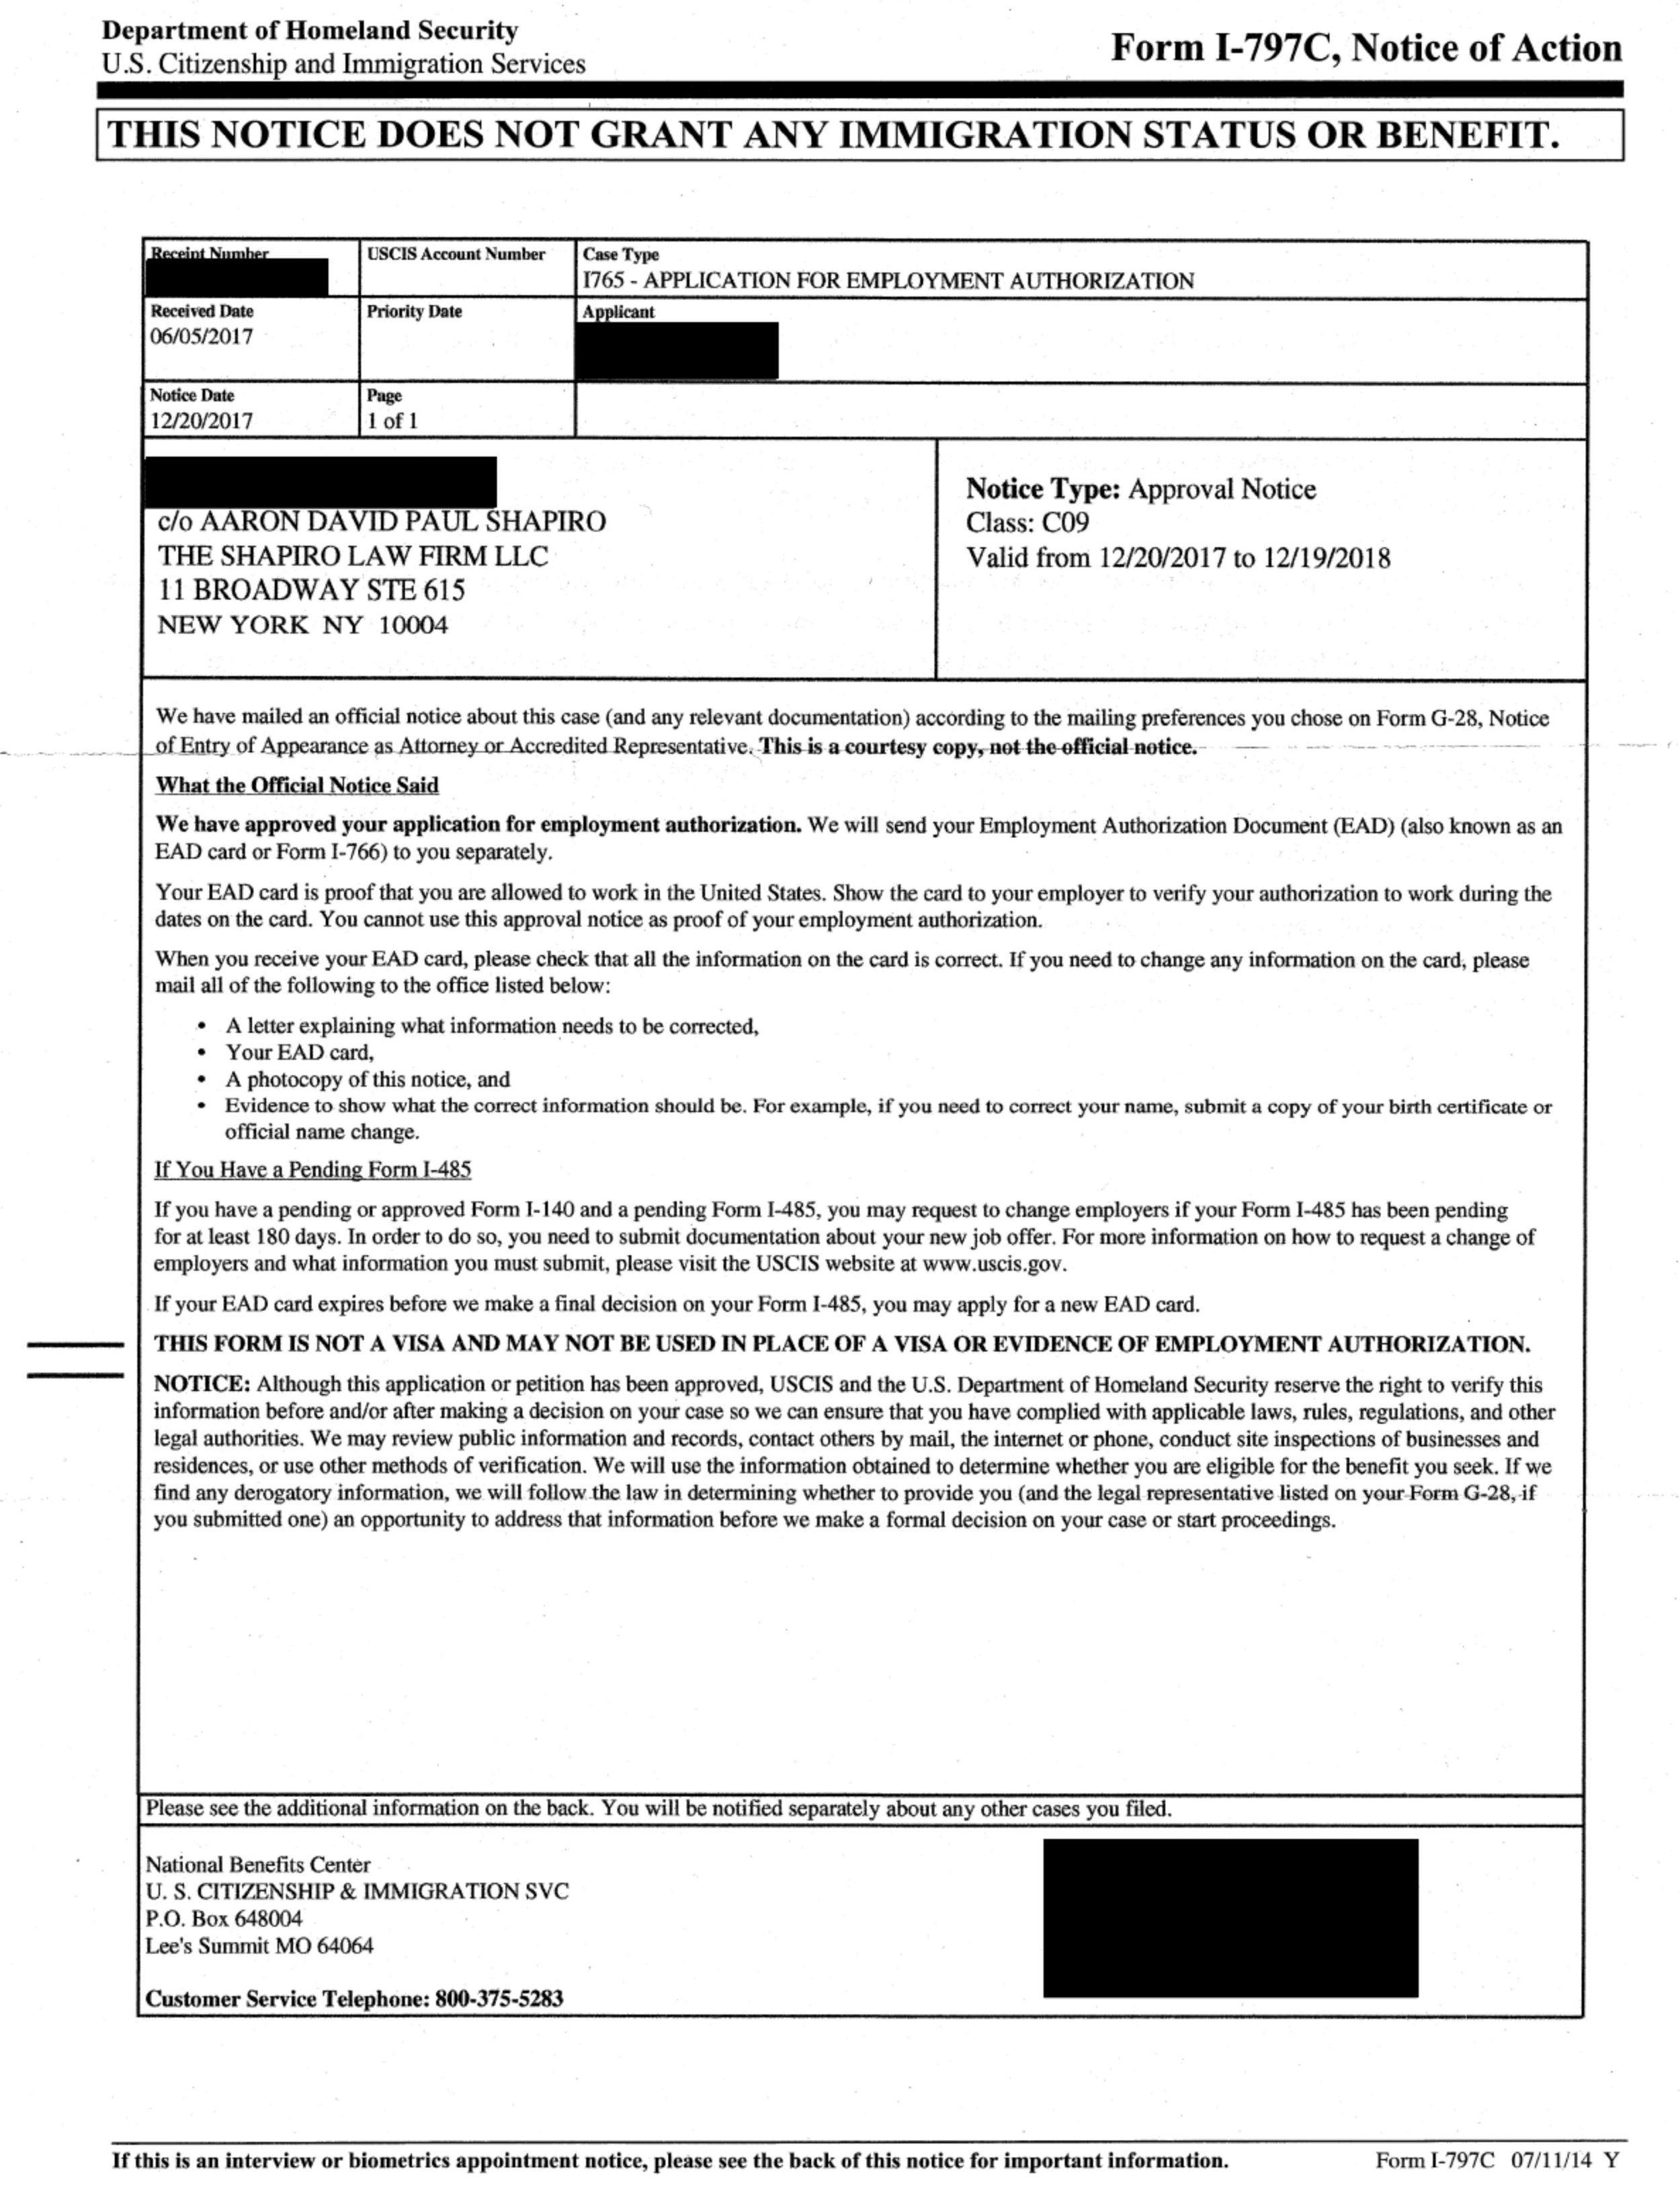 Form I-797C, Notice of Action -  I-765 Approval Notice